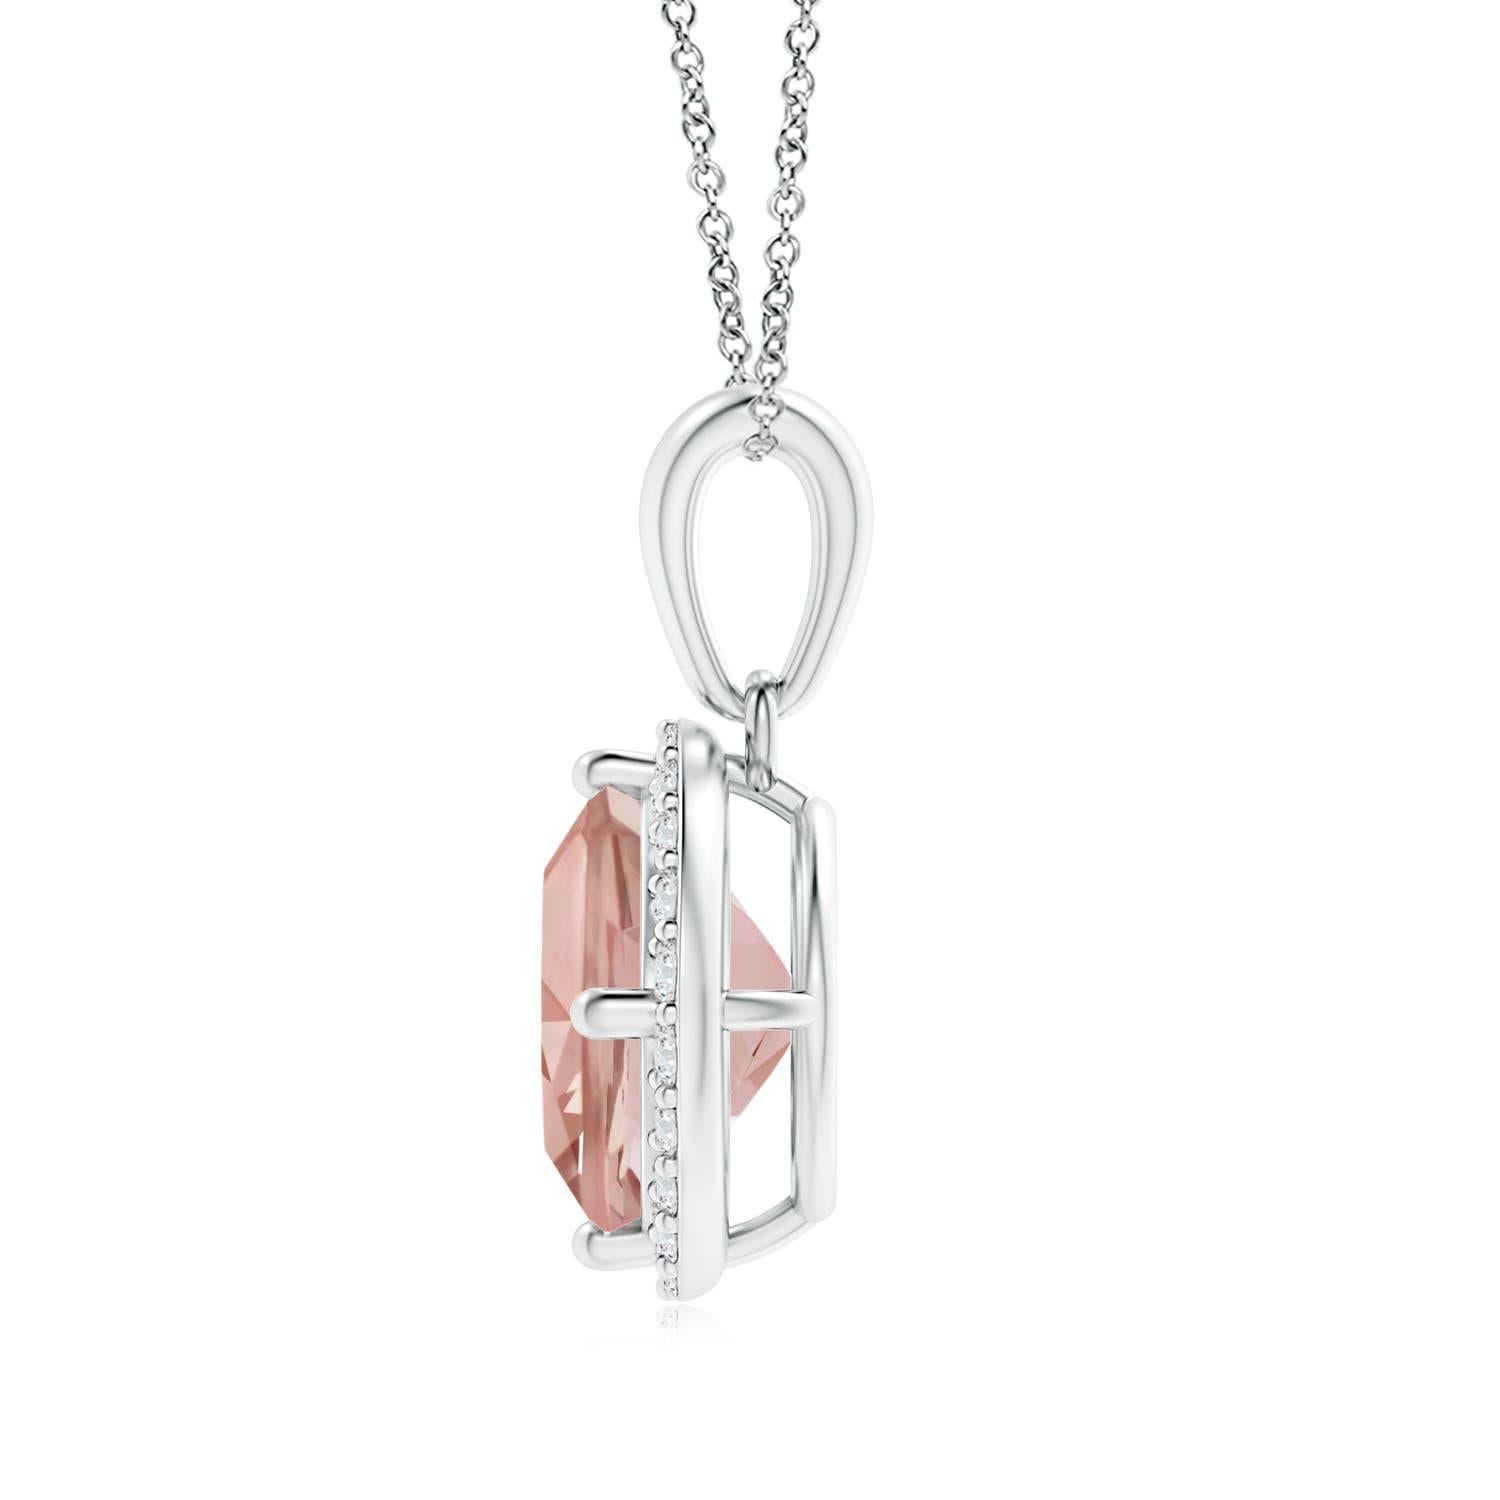 Hanging from a plain lustrous bale, this morganite and diamond halo pendant in 14k white gold exudes a distinctive appeal. The cushion morganite is secured sideways in a claw prong setting and surrounded by a halo of diamond accents.
